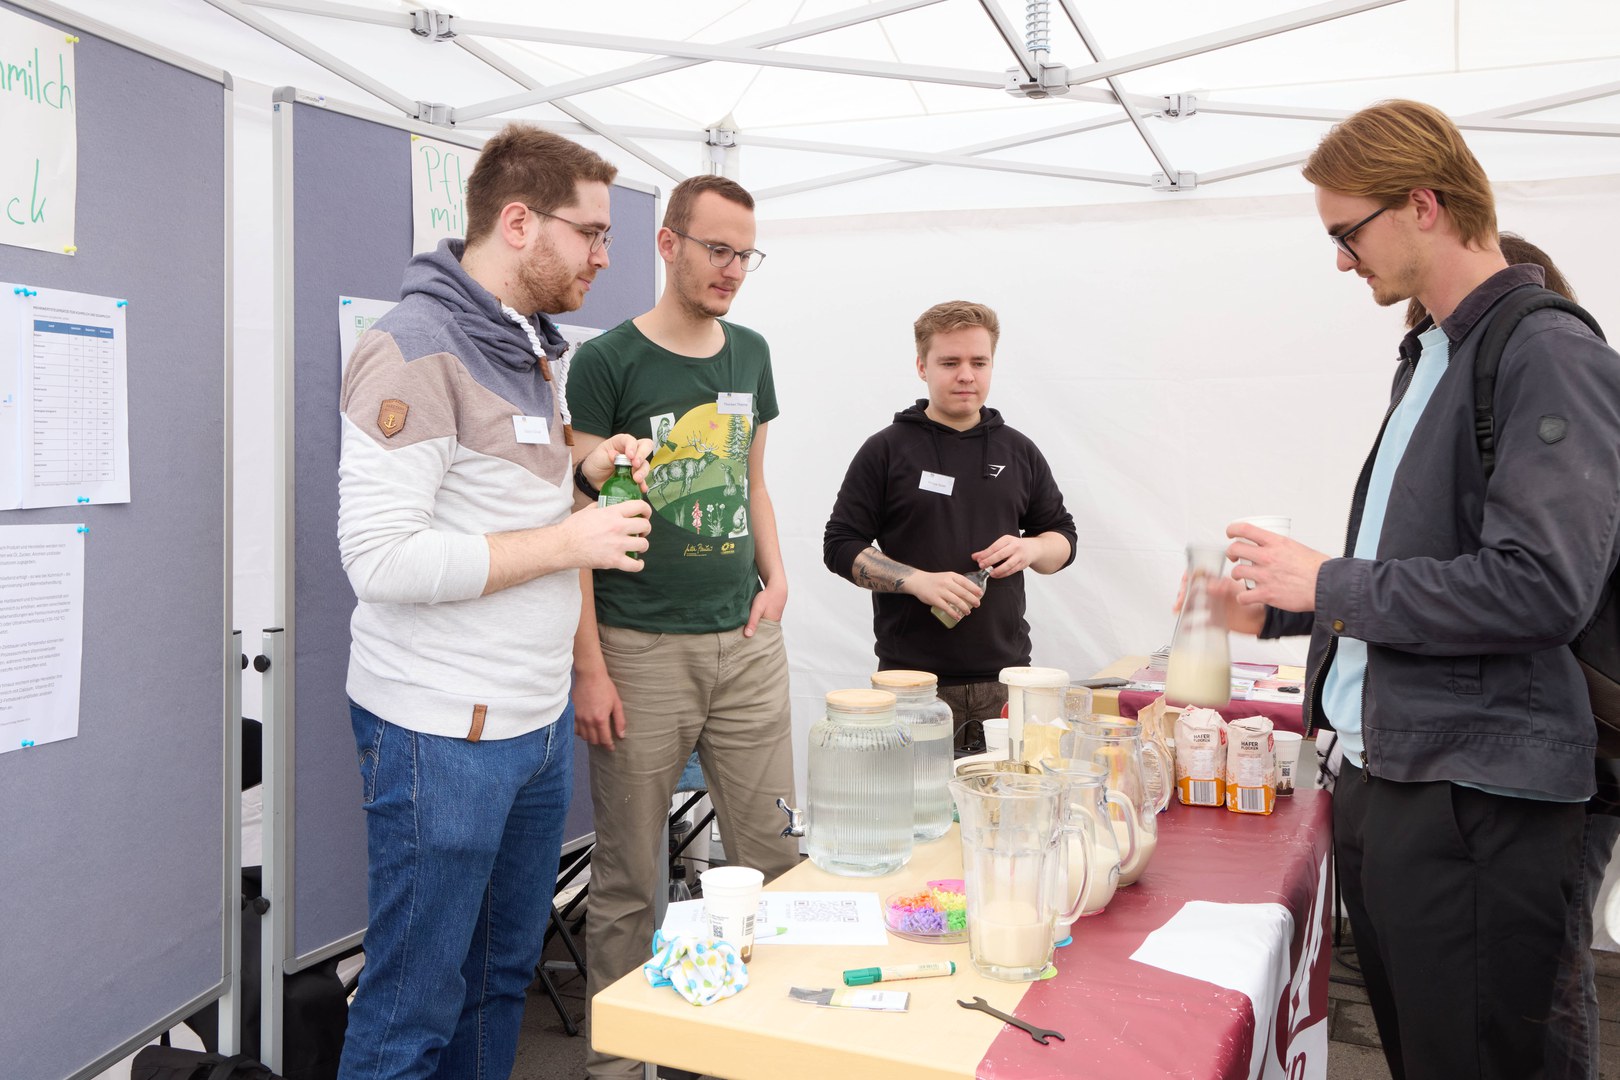 The AStA stall provided a crash course in making your own oat milk, with a portable solar panel generating the electricity required for the mixer